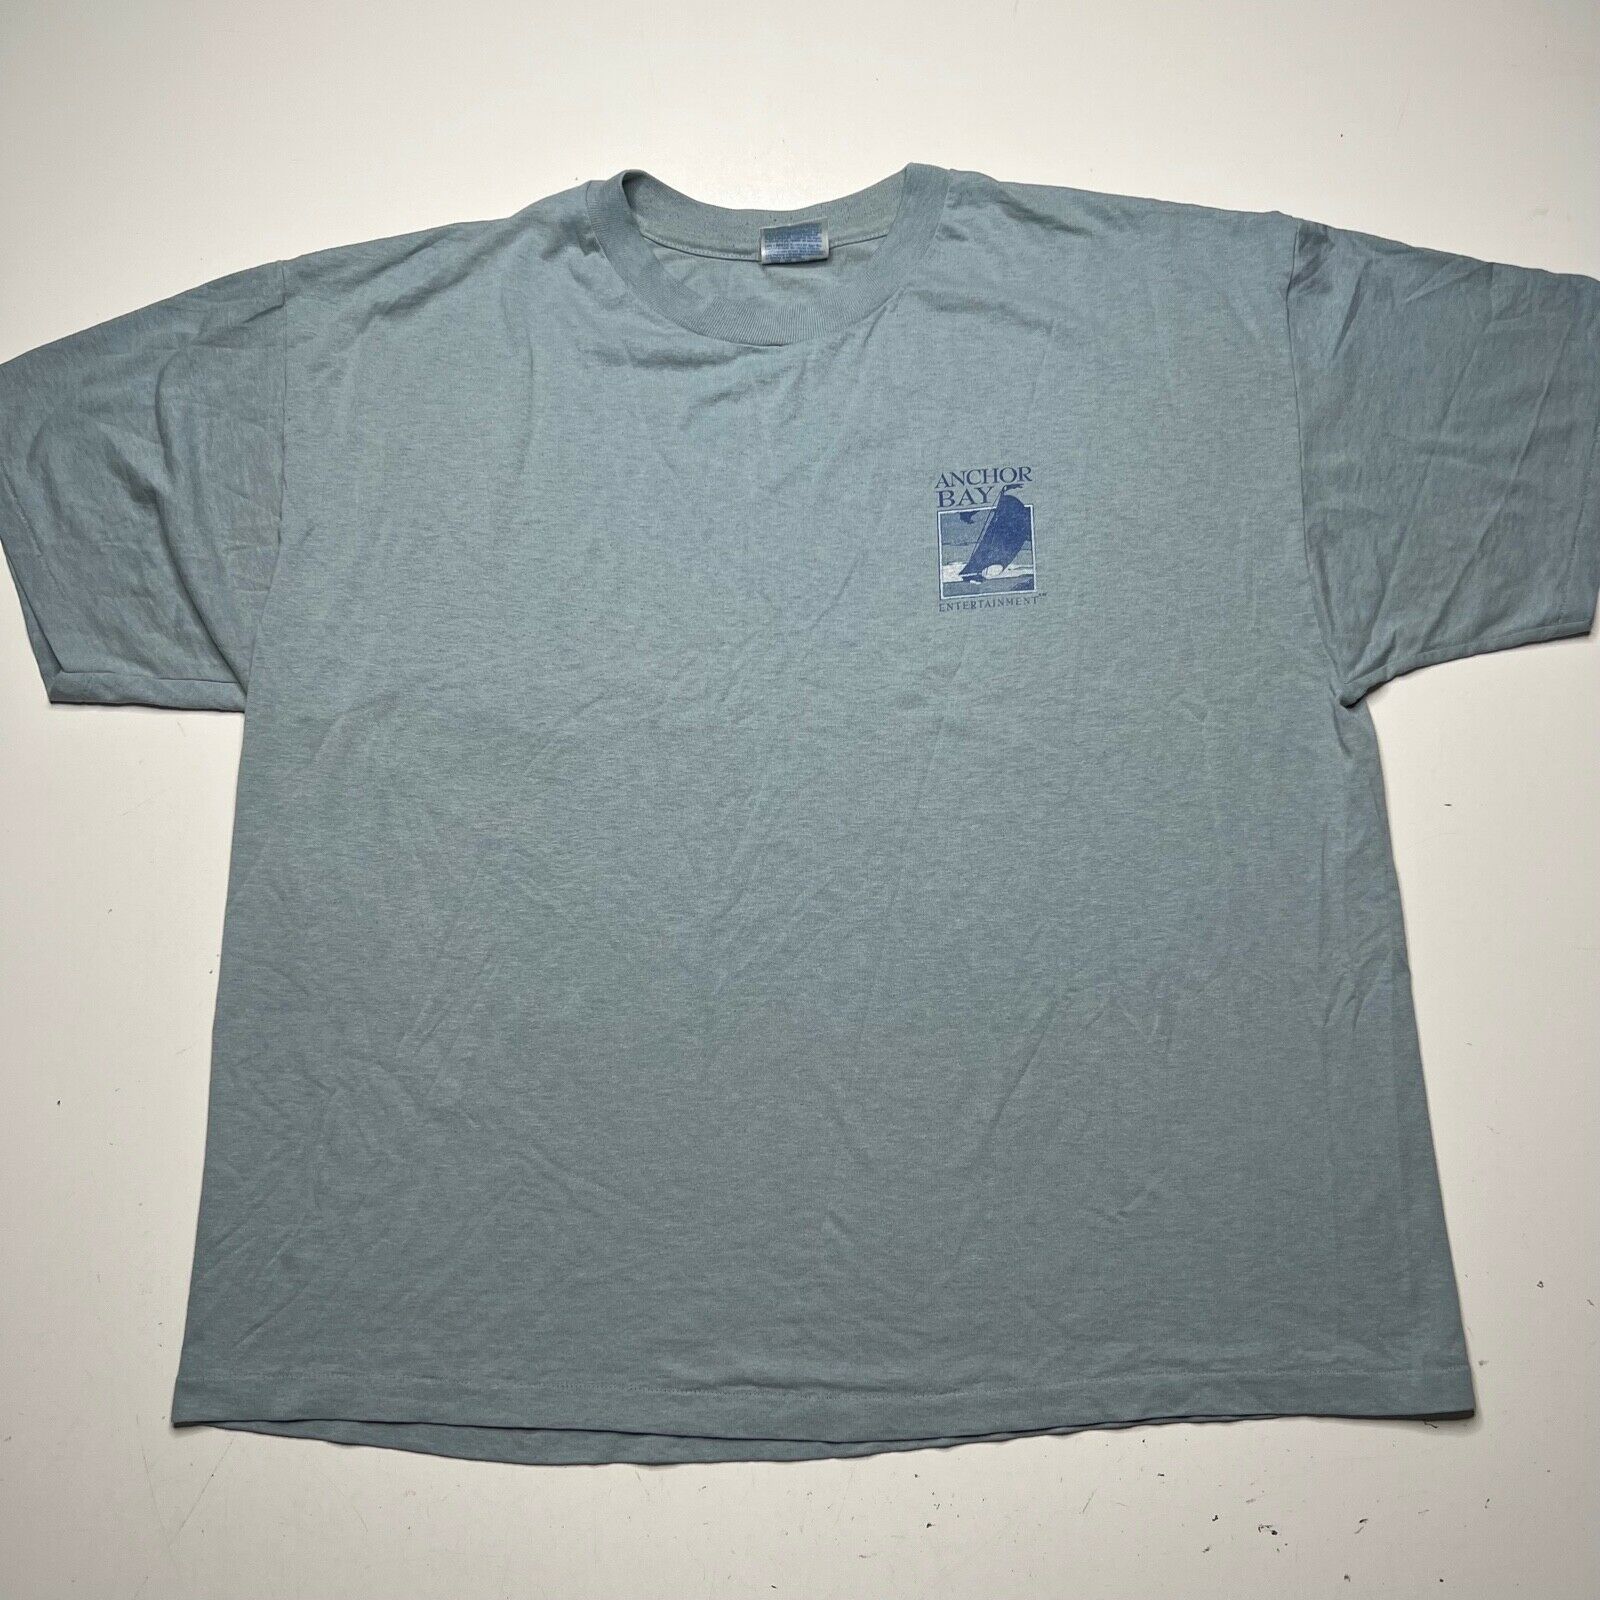 Primary image for Vintage 90s Hanes Anchor Bay Entertainment Graphic Single Stitch T Shirt Size XL